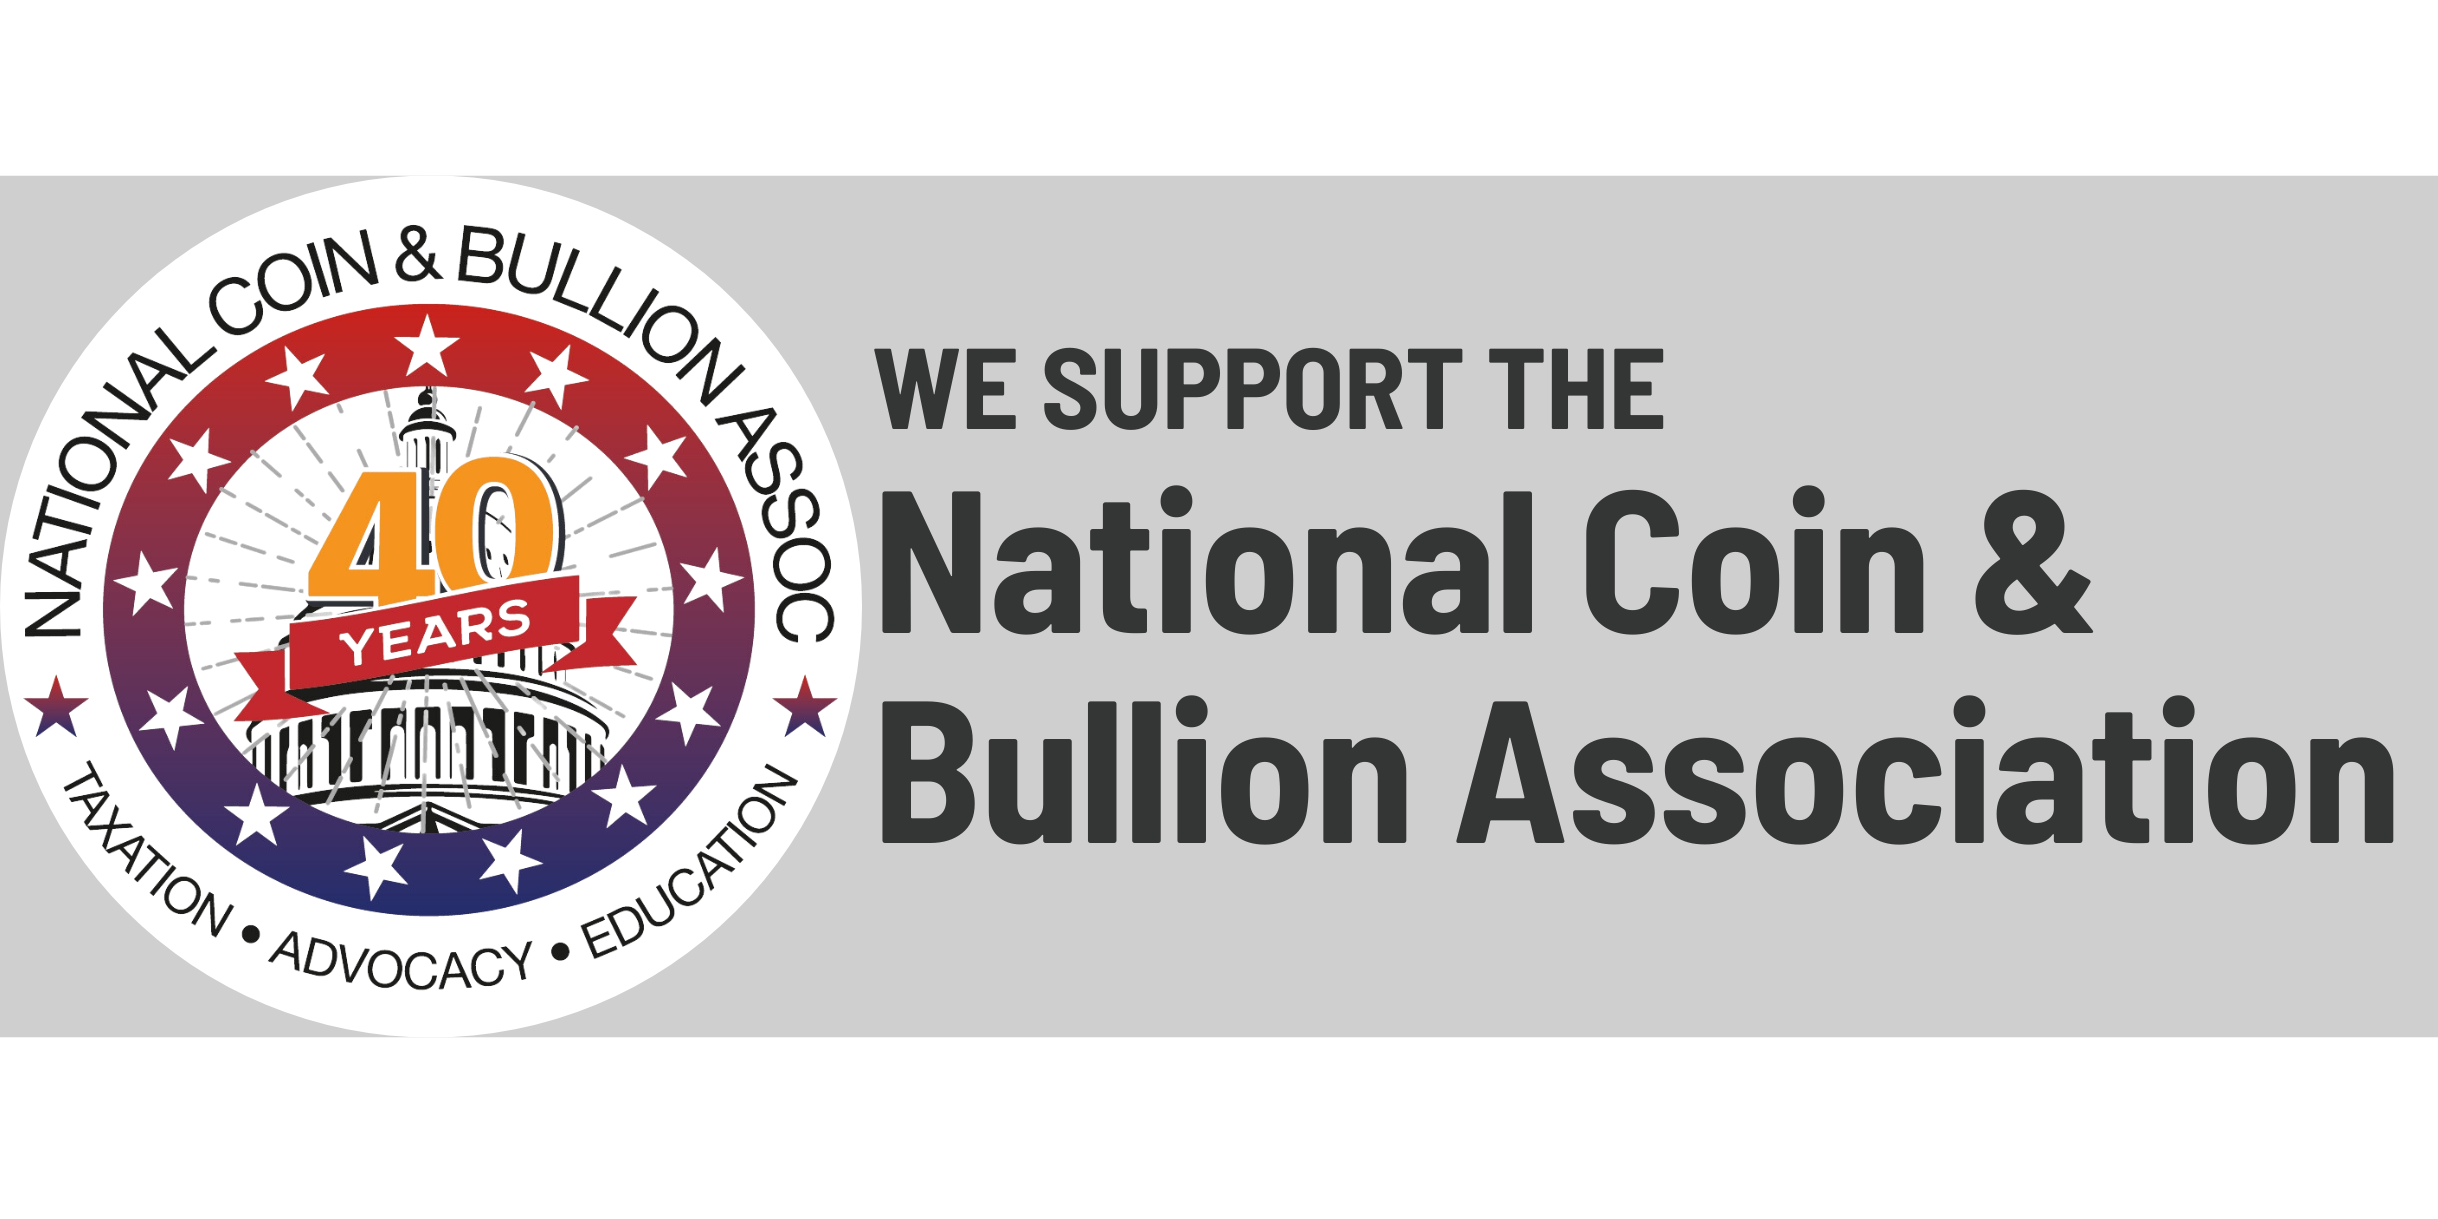 We support the National Coin & Bullion Association